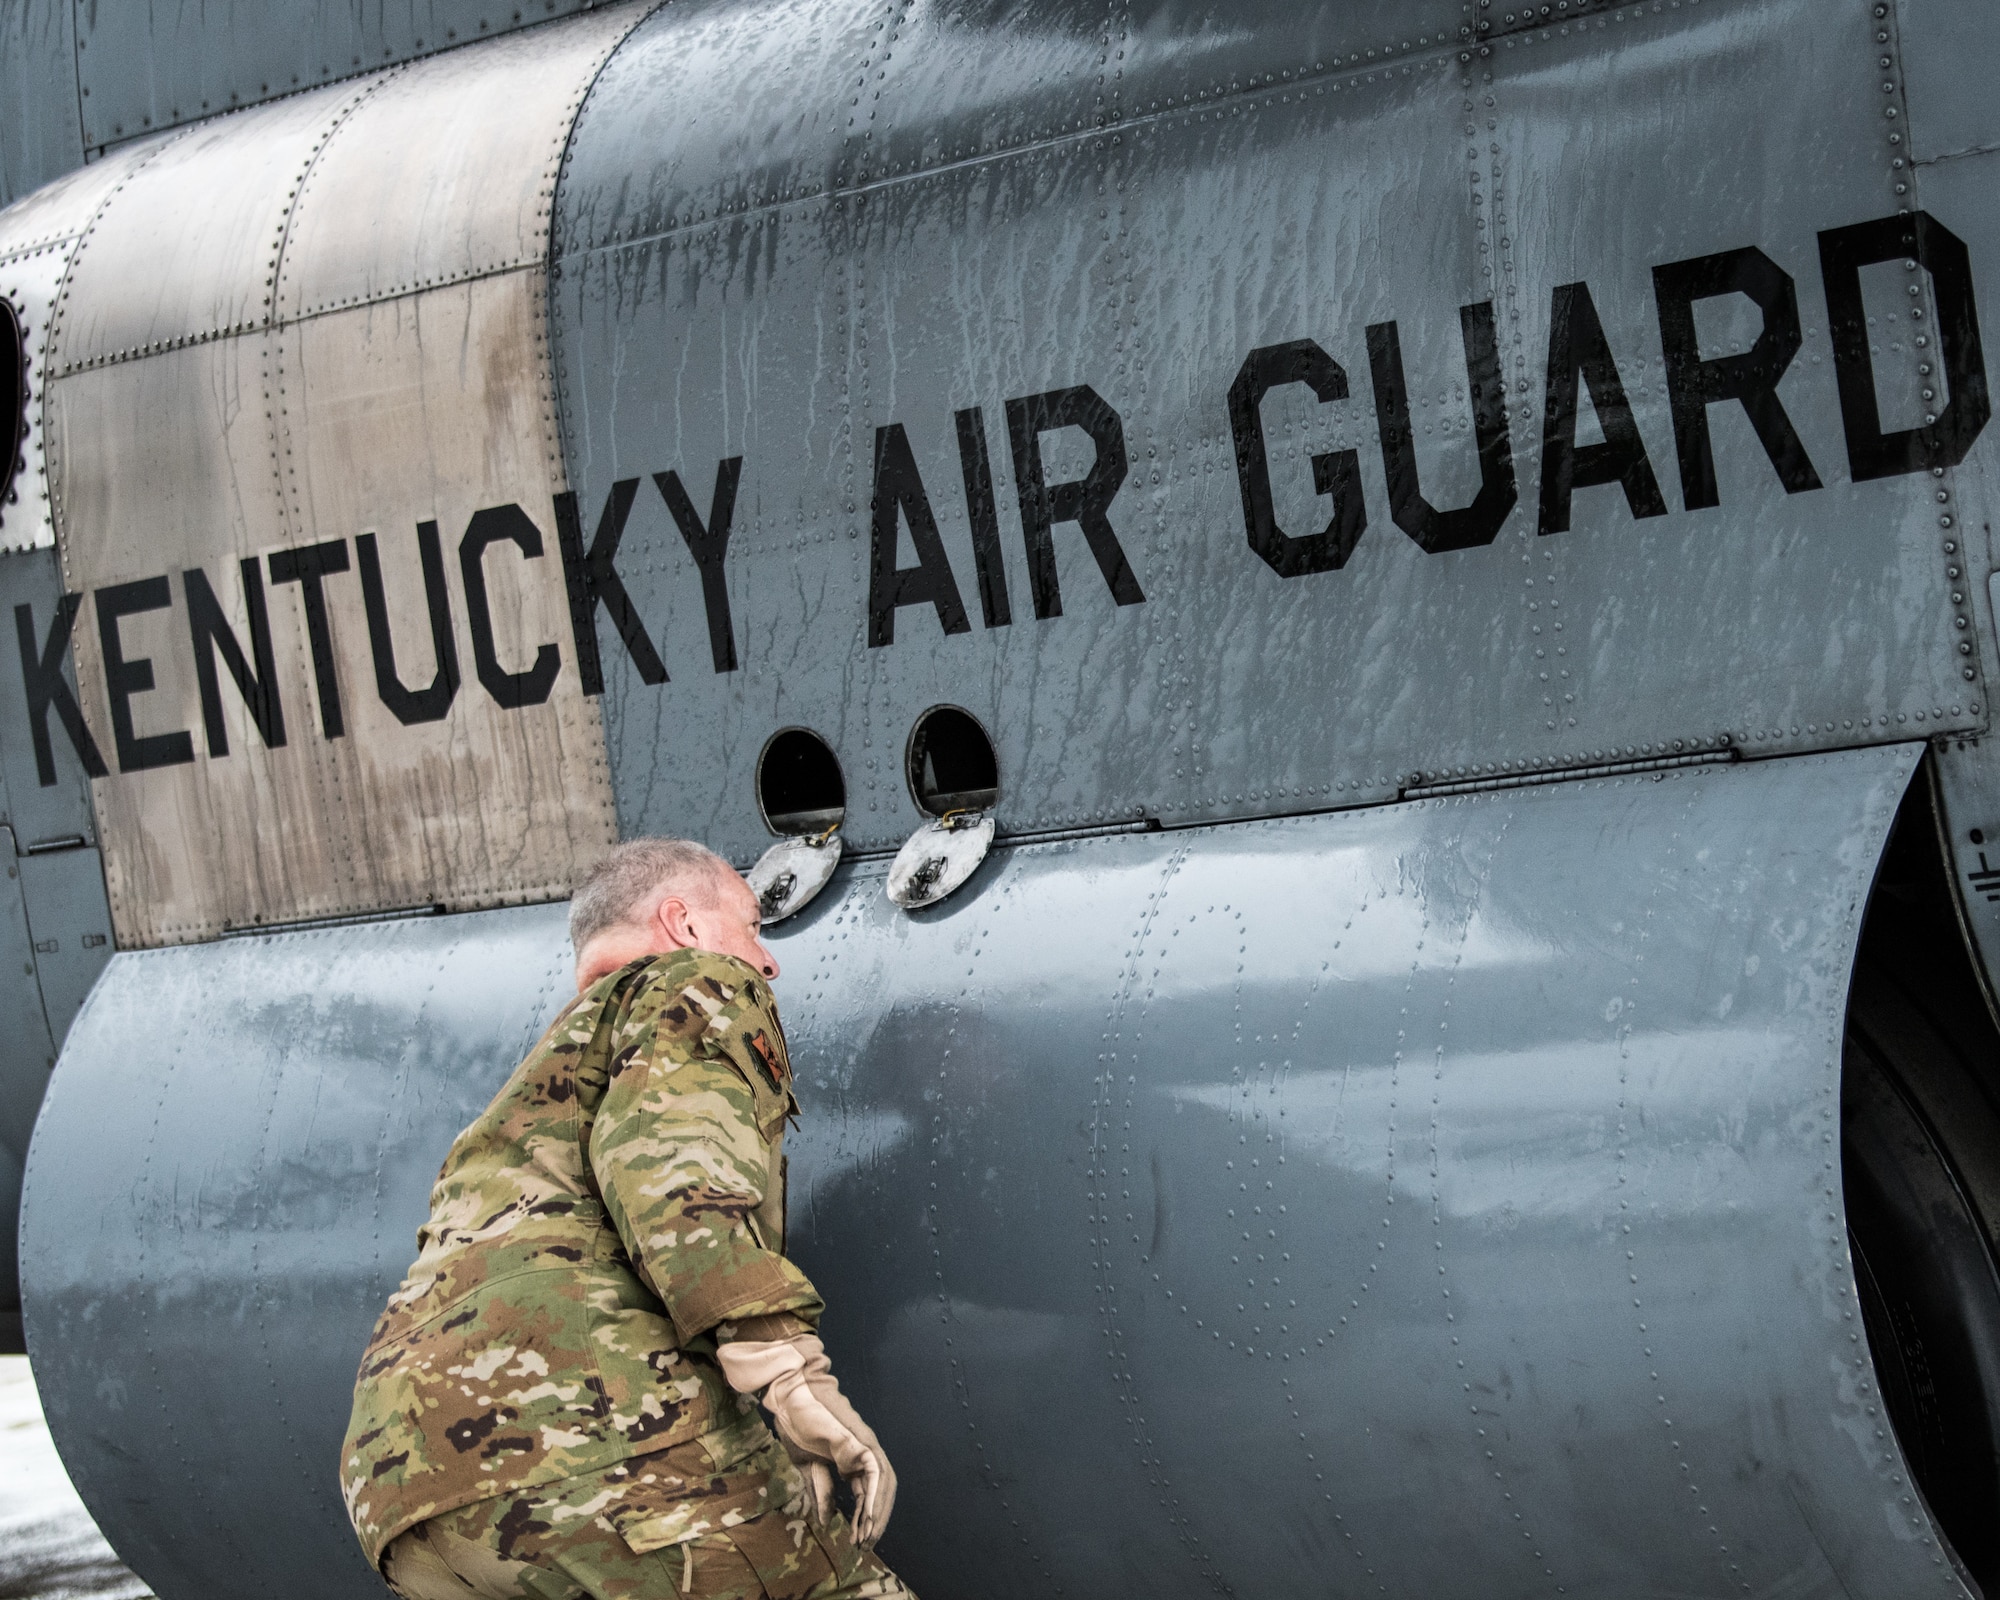 Master Sgt. Winston Pike of the Kentucky Air National Guard’s 123rd Airlift Wing prepares a C-130 Hercules aircraft for flight formation training in Pisa, Italy, Nov. 3, 2019. The sortie was part of Mangusta 19, a bi-lateral exercise with the Italian Army designed to promote readiness and interoperability among NATO allies. (U.S. Air National Guard photo by Senior Airman Chloe Ochs)